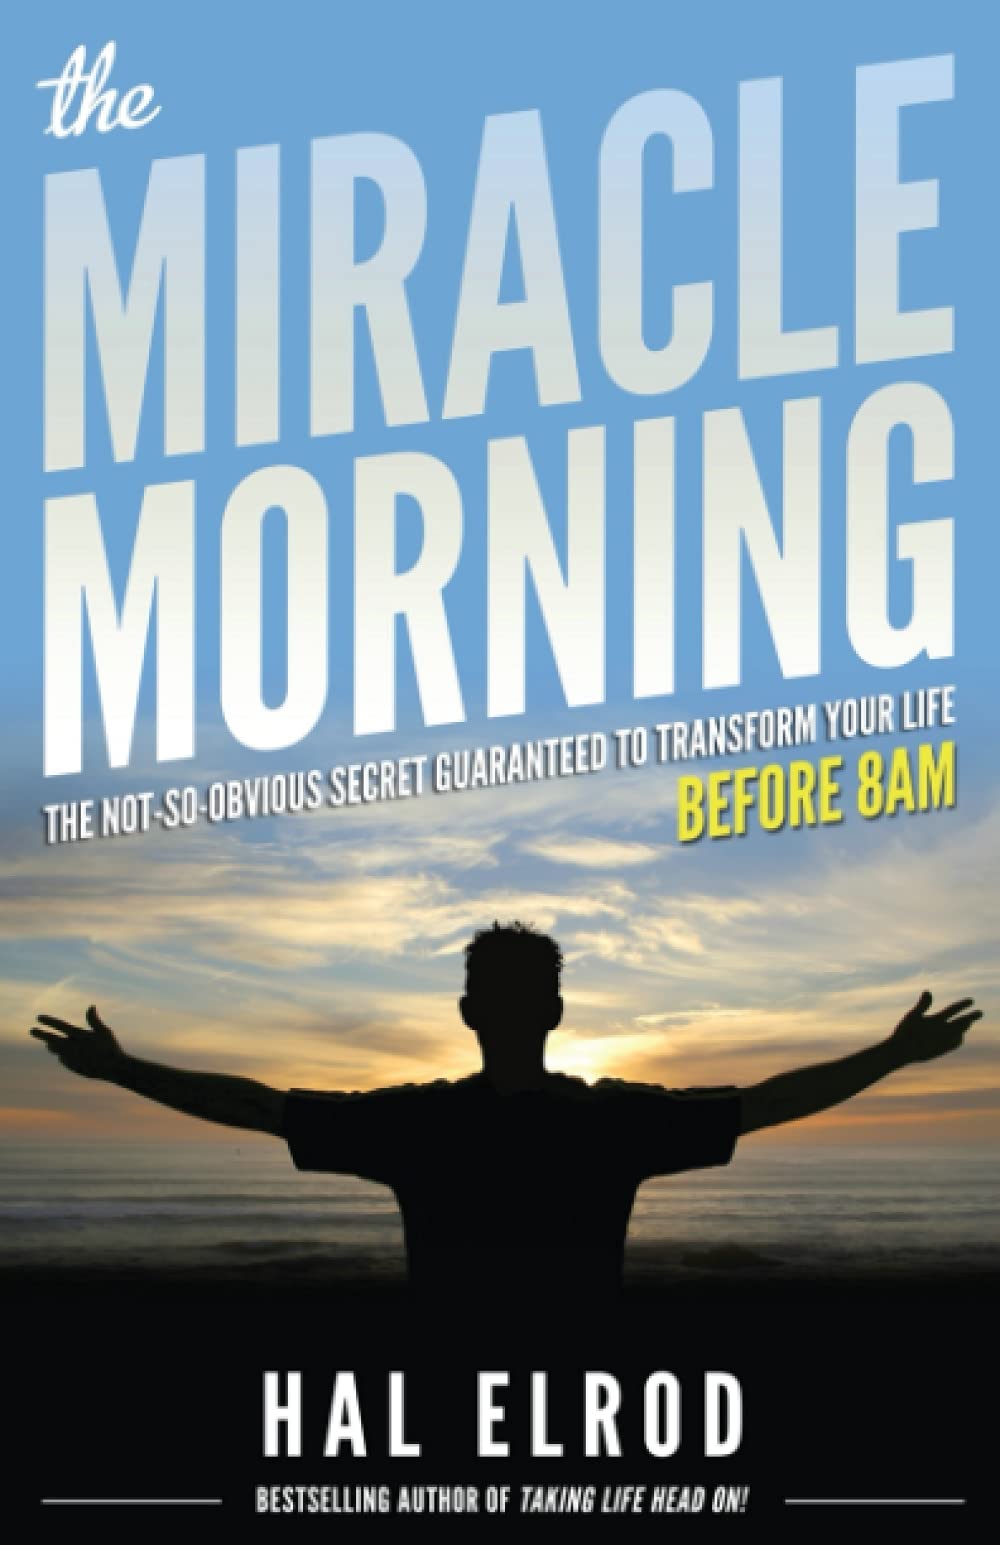 "The Miracle Morning" by Hal Elrod